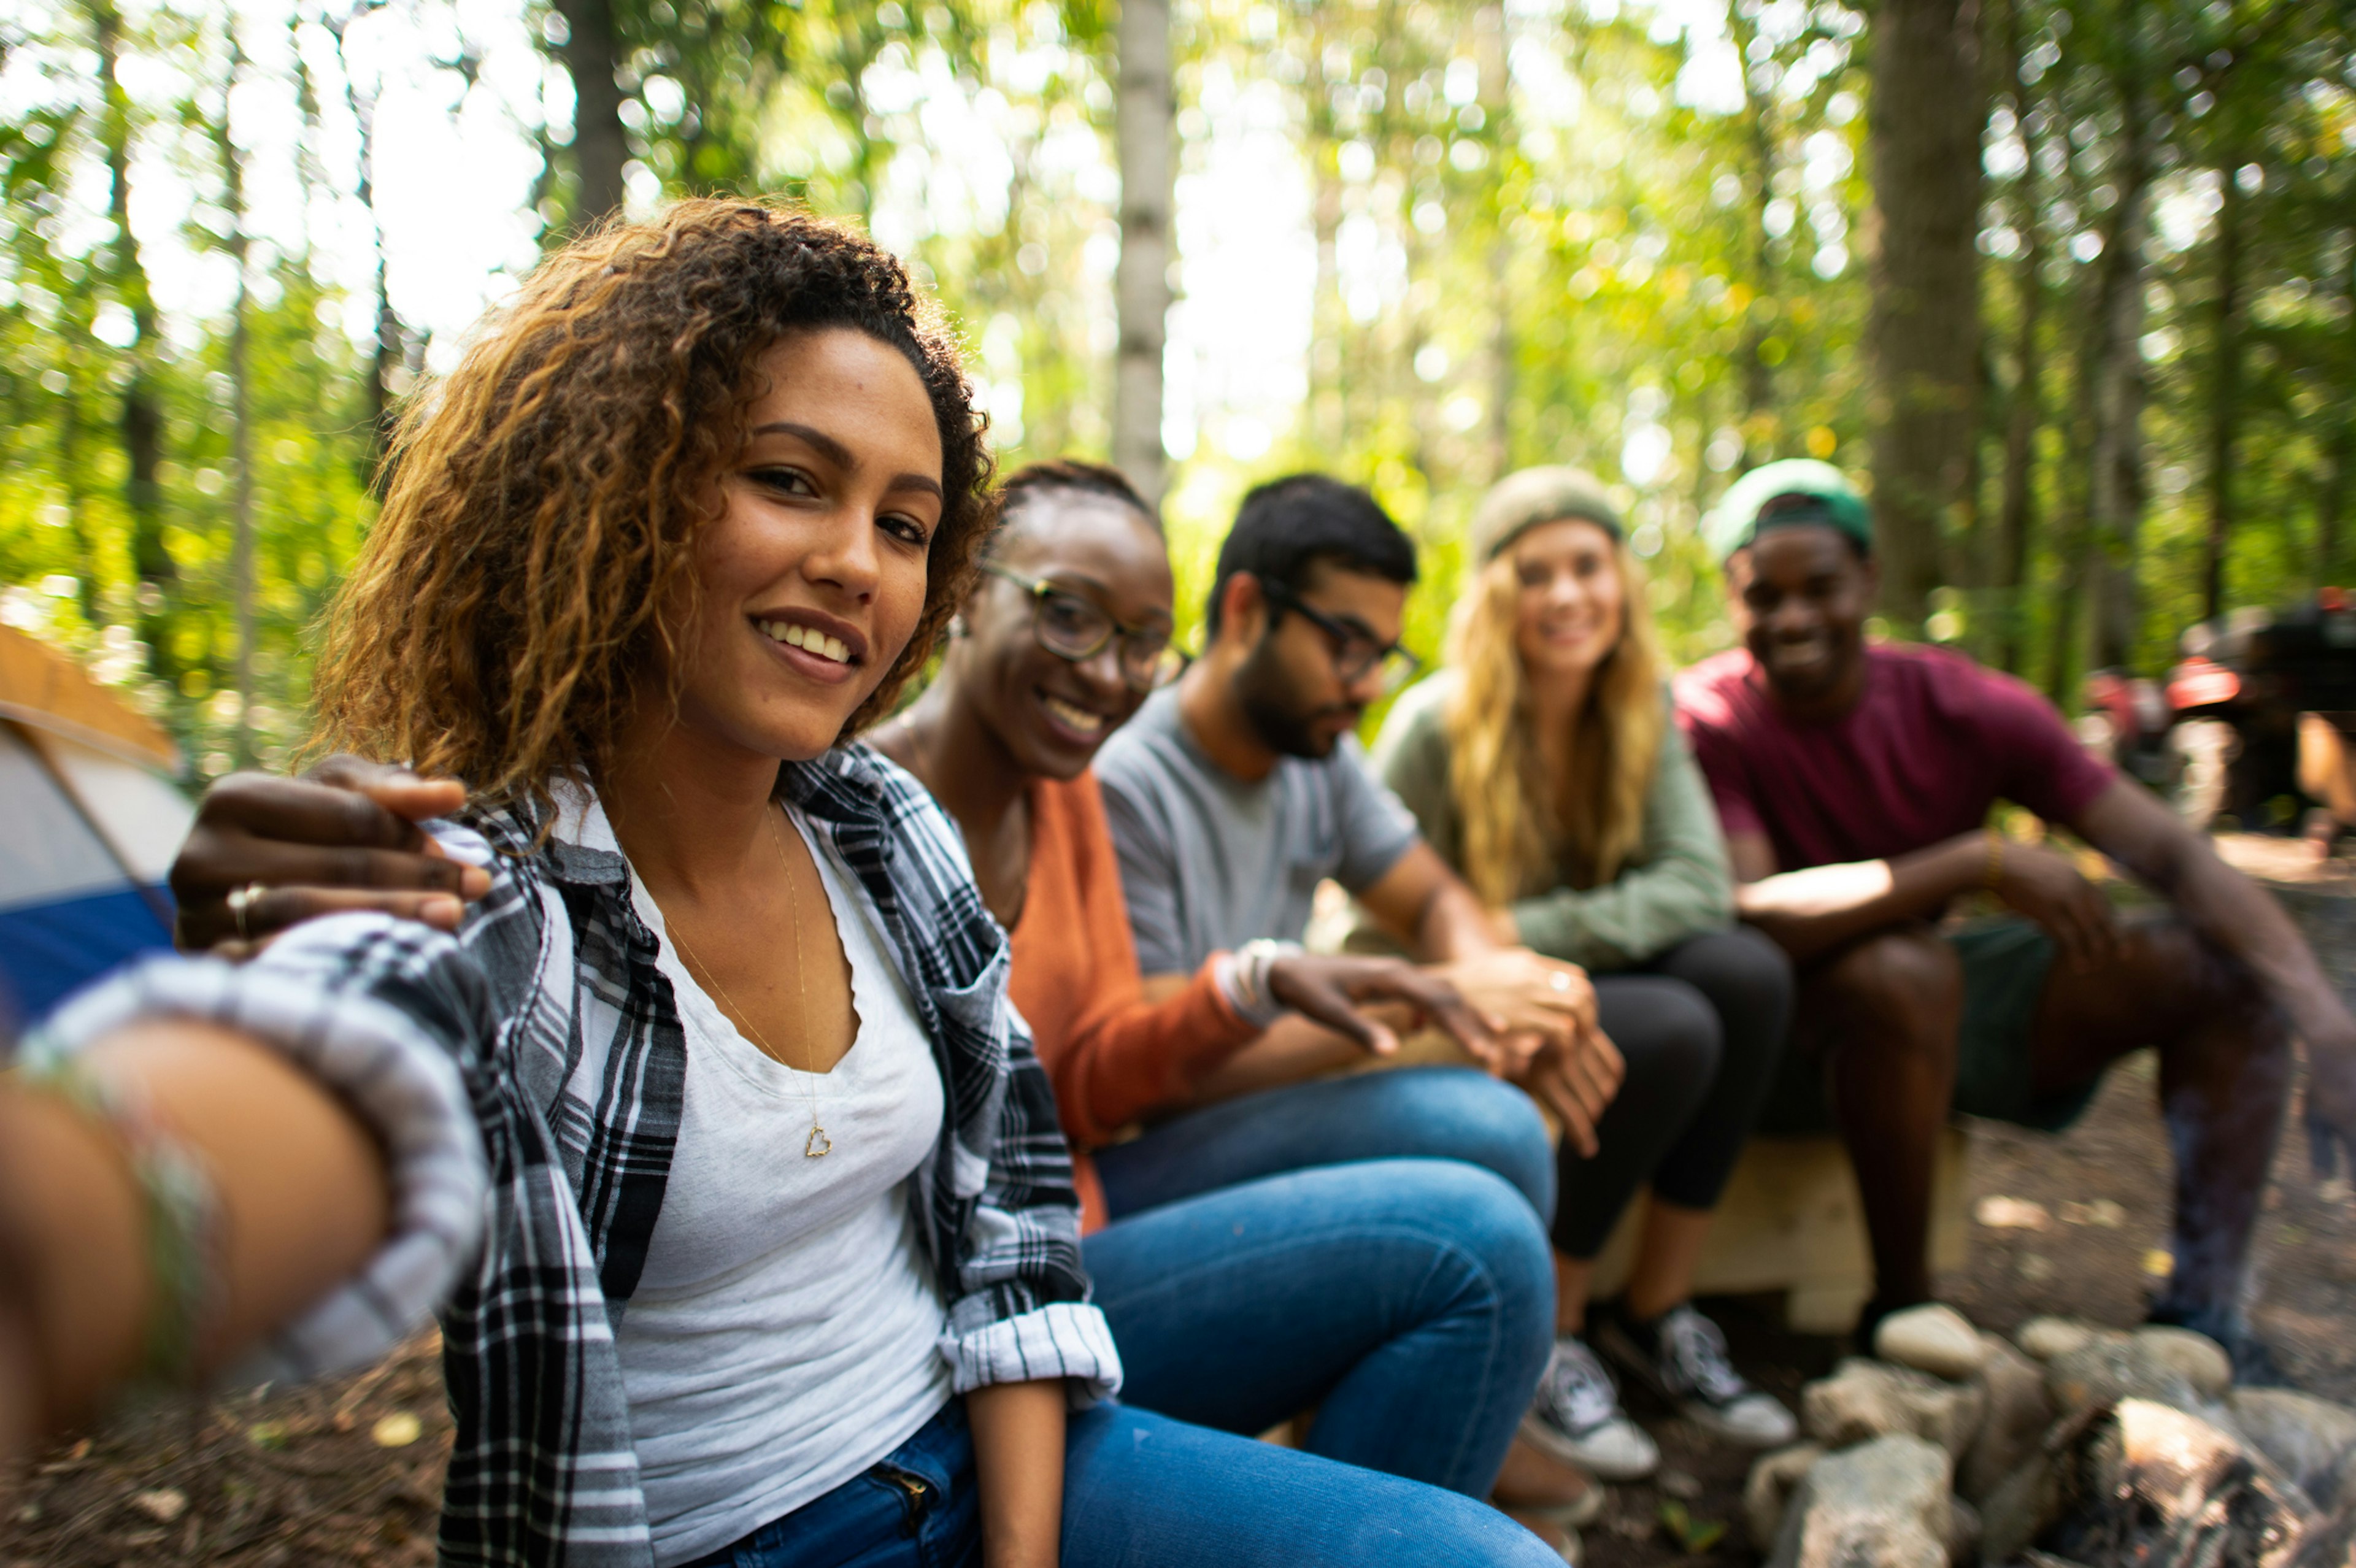 A group of multi-ethnic young adults sit on a wooden bench around a camp fire. They are all dressed casually in fall clothing and sitting around a fire pit.  The mixed race woman on the ed is holding out her camera to take a selfie of the group.